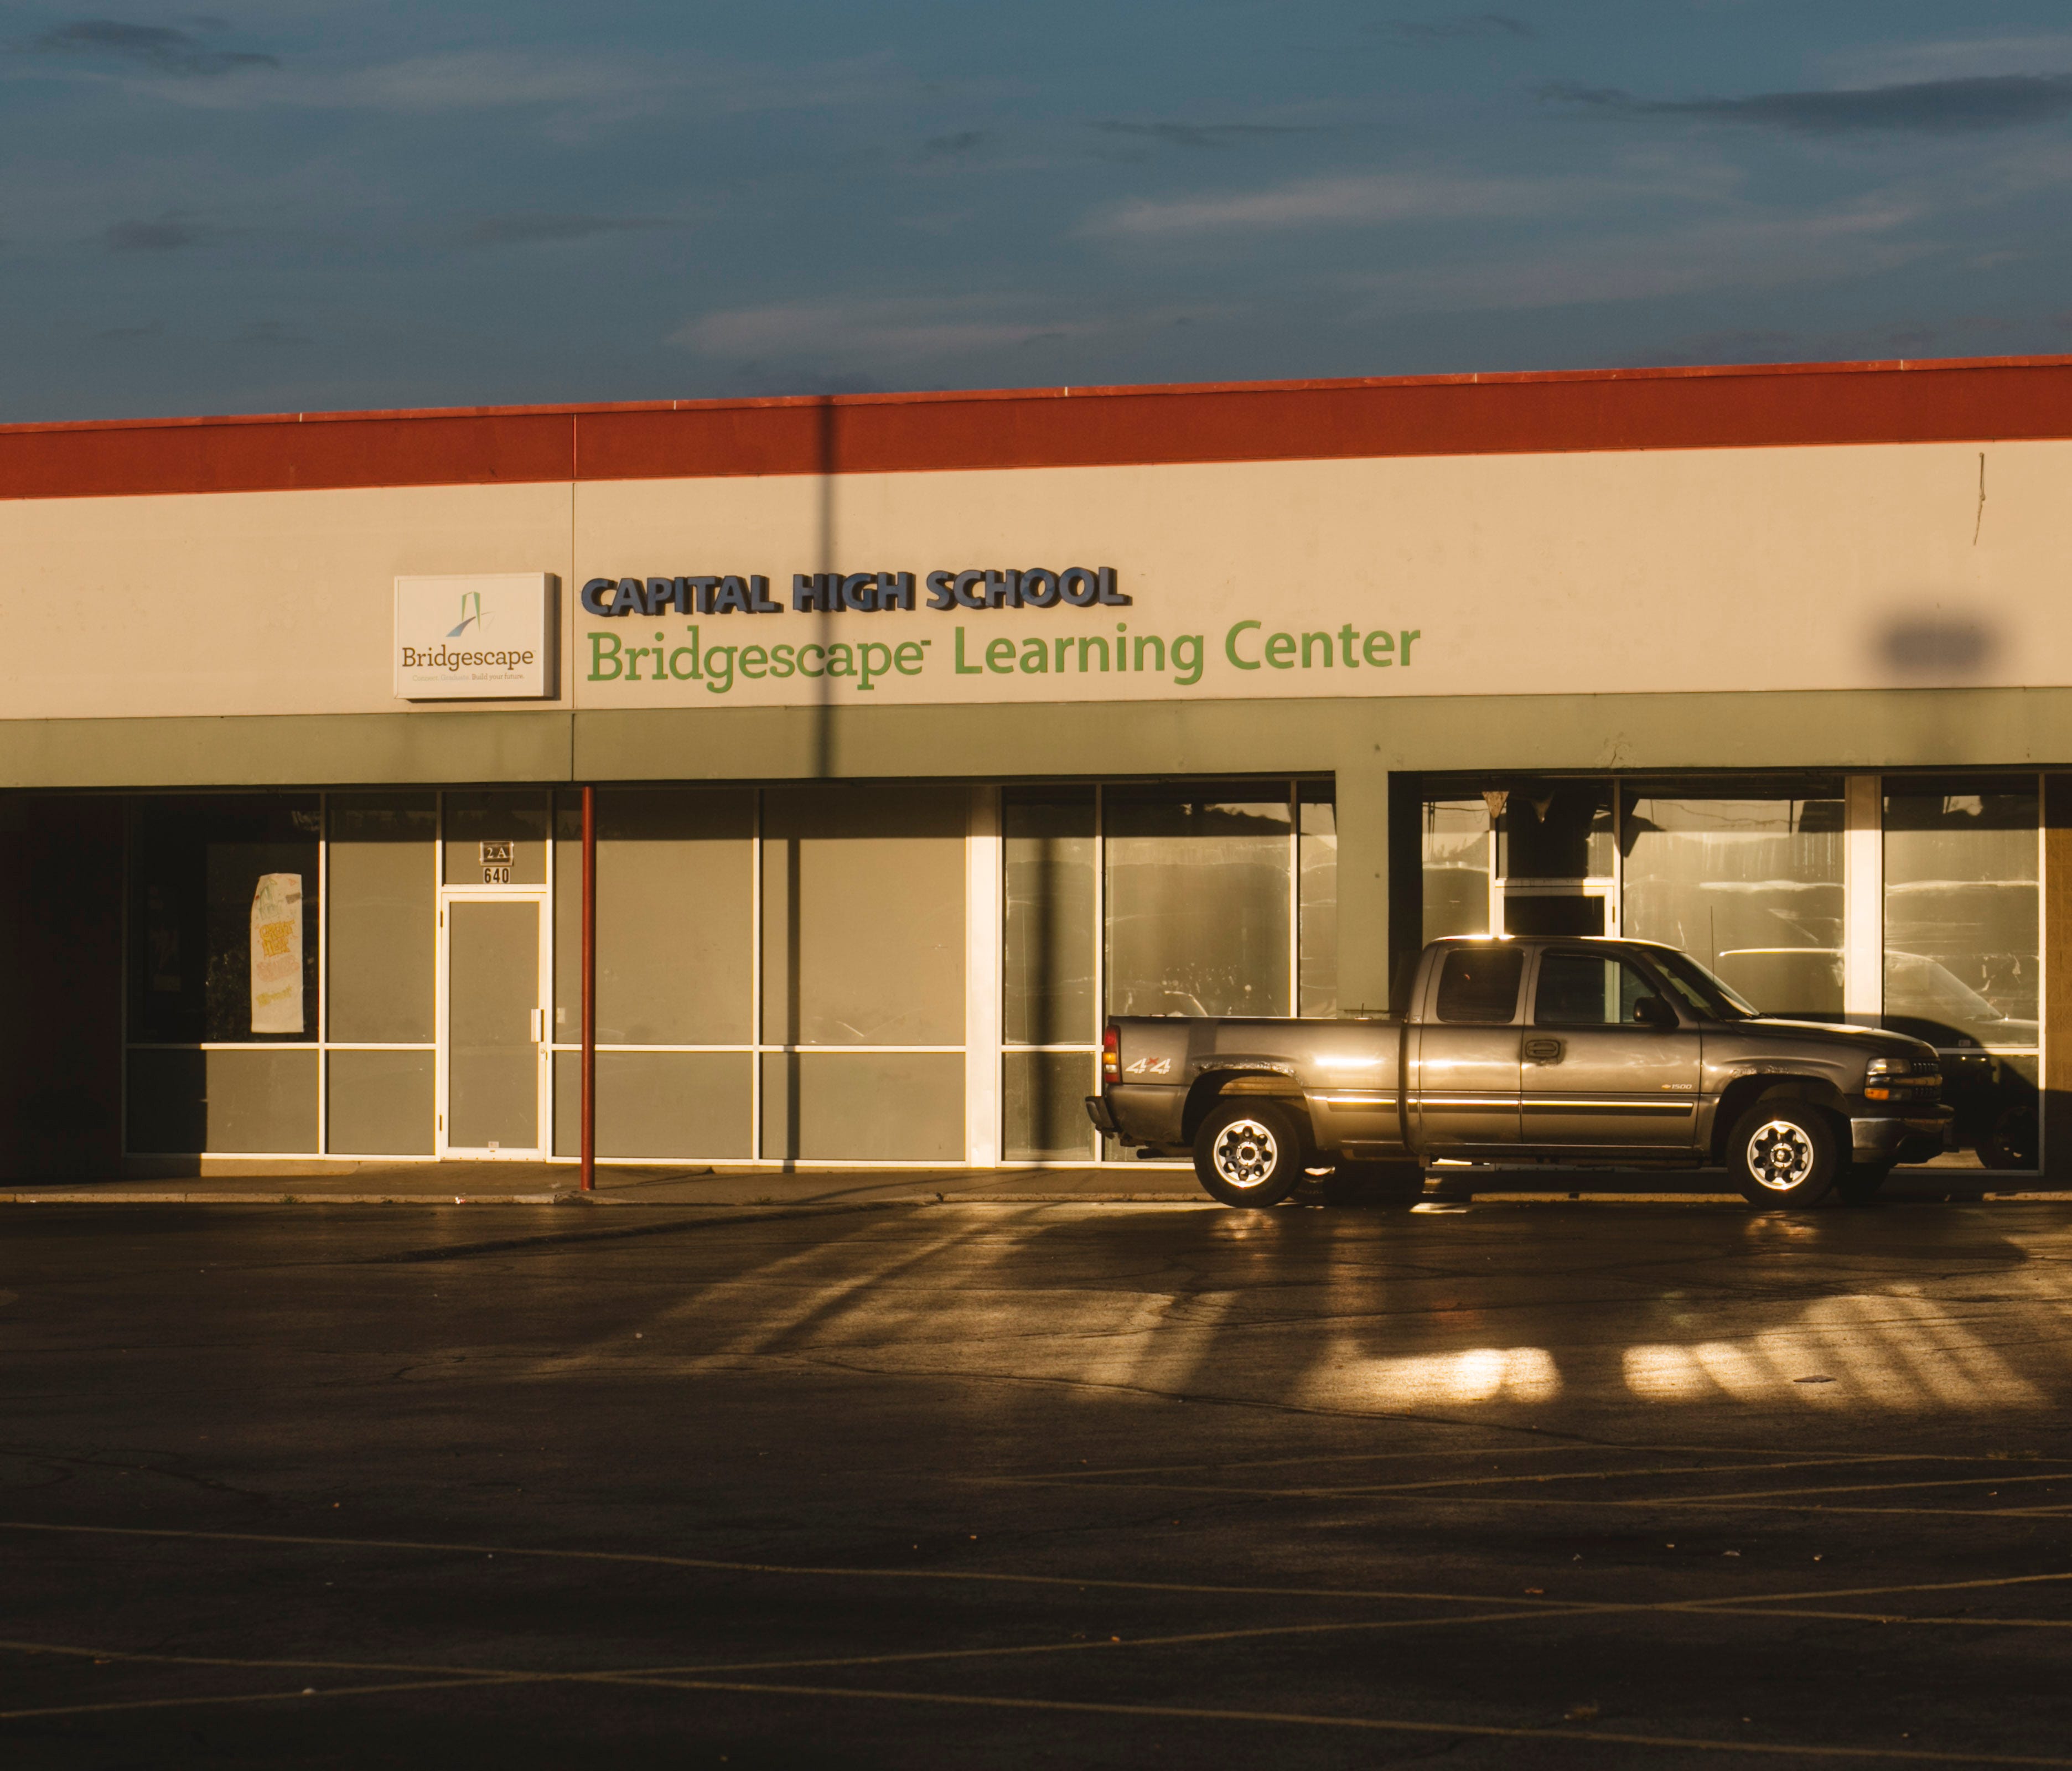 Bridgescape Learning Center's Capital High School, part of the EdisonLearning umbrella, on September 21, 2017 in Columbus, Ohio. The charter school is in a strip mall with numerous abandoned storefronts.  